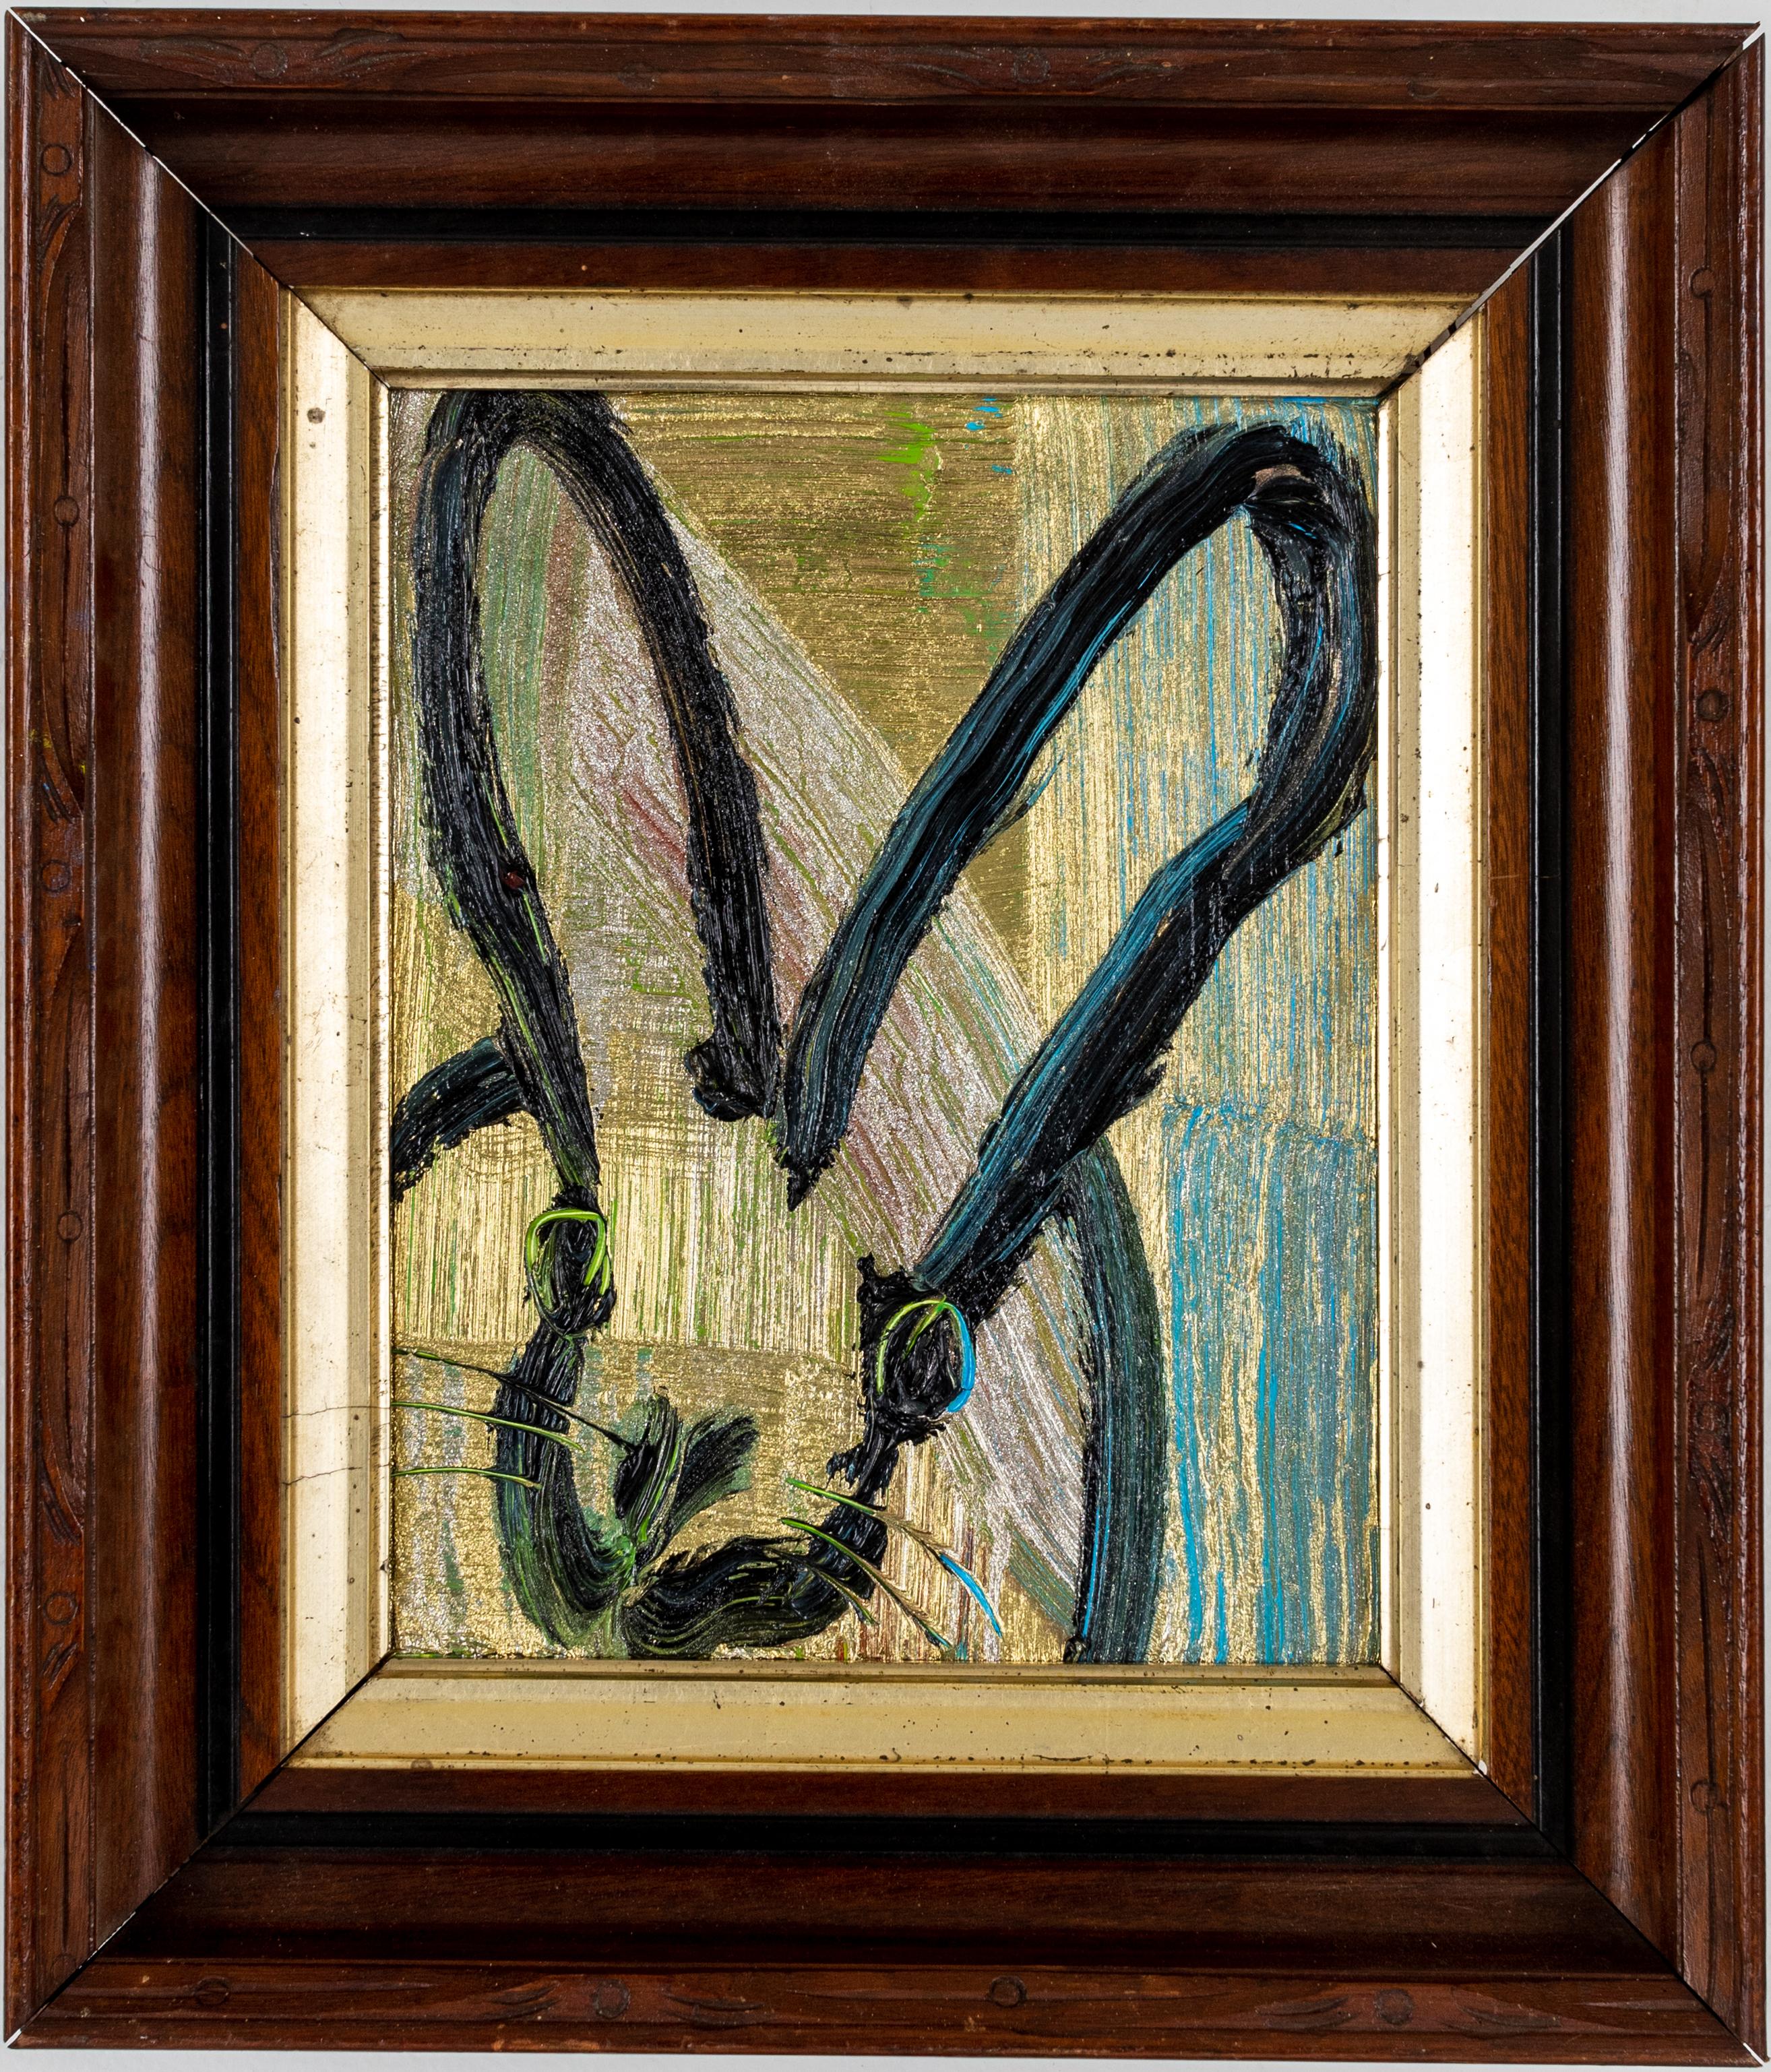 Hunt Slonem "Jacque" Metallic Bunny
Black outlined bunnies on a multicolored metallic background in an antique wood frame

Unframed: 10 x 8 inches  
Framed: 15 x 13 inches
*Painting is framed - Please note that not all Hunt Slonem frames are not in